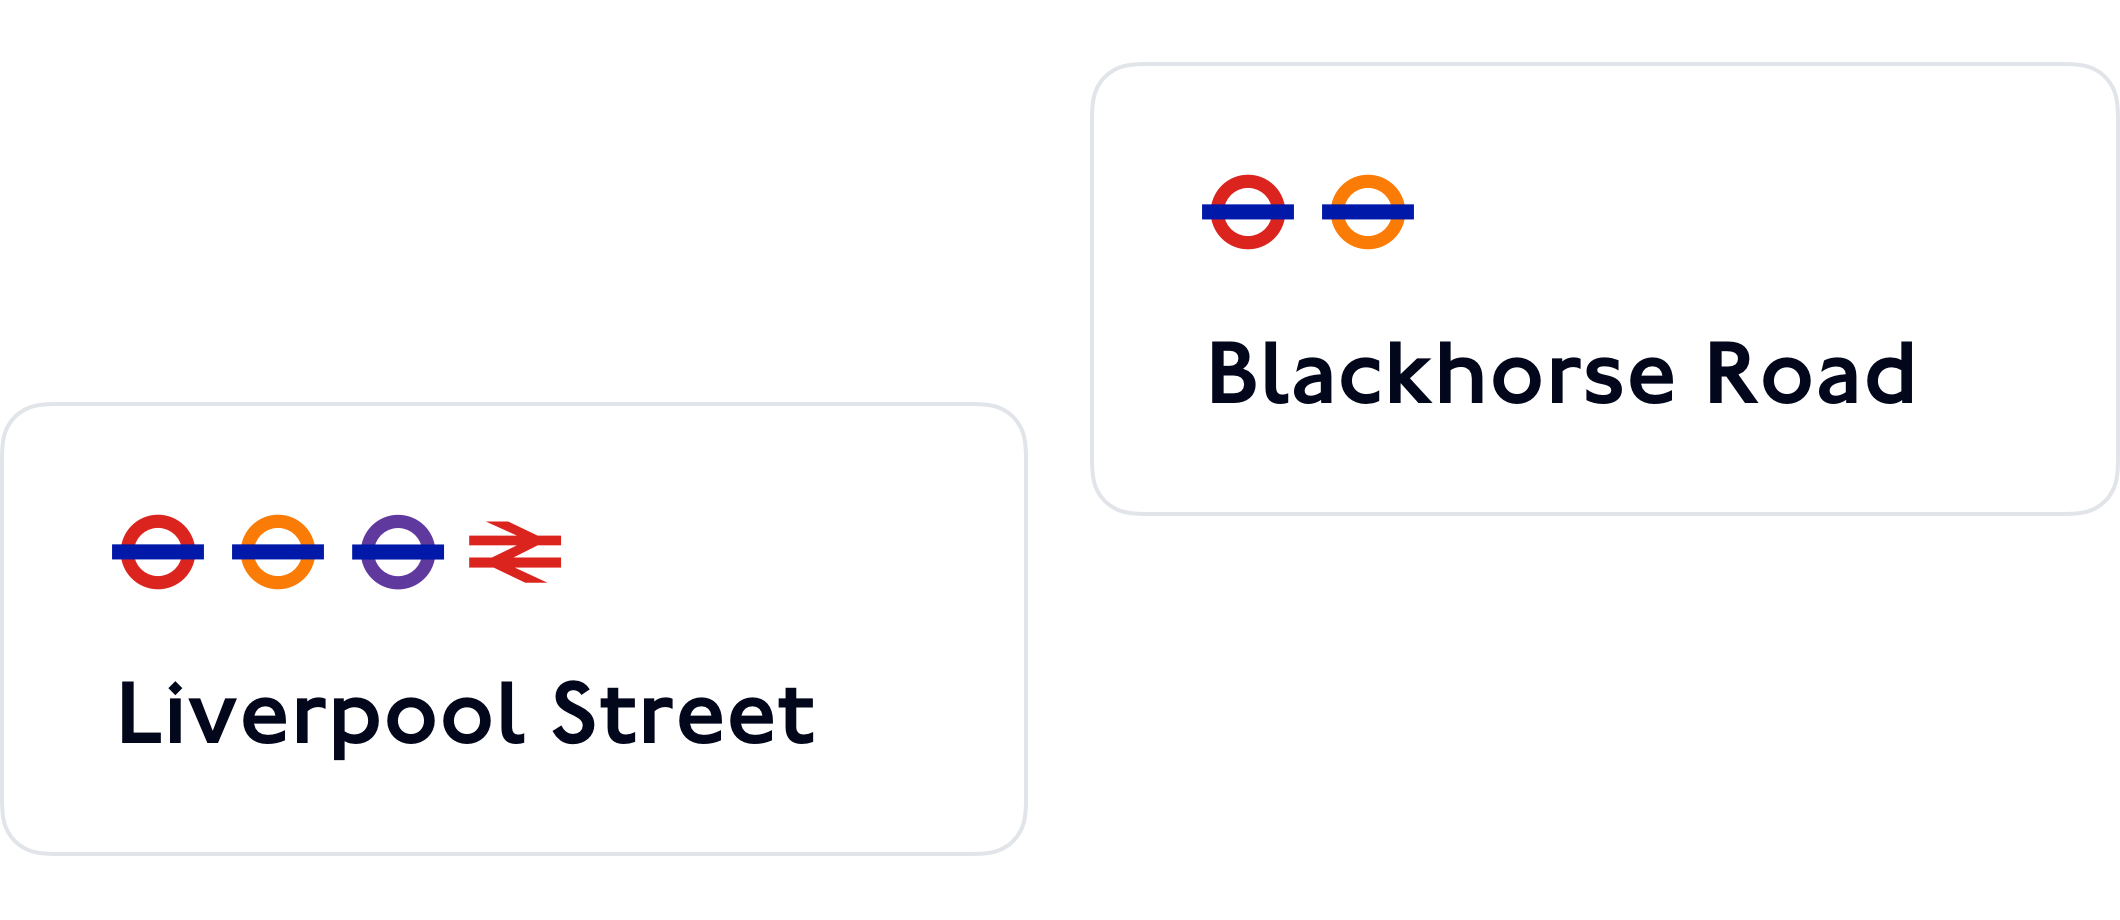 Two examples of UI cards, each displaying the name of a station and the logos of services offered: Liverpool Street (with logos for London Underground, London Overground, Elizabeth line and National Rail); and Blackhorse Road (with logos for London Underground and London Overground).